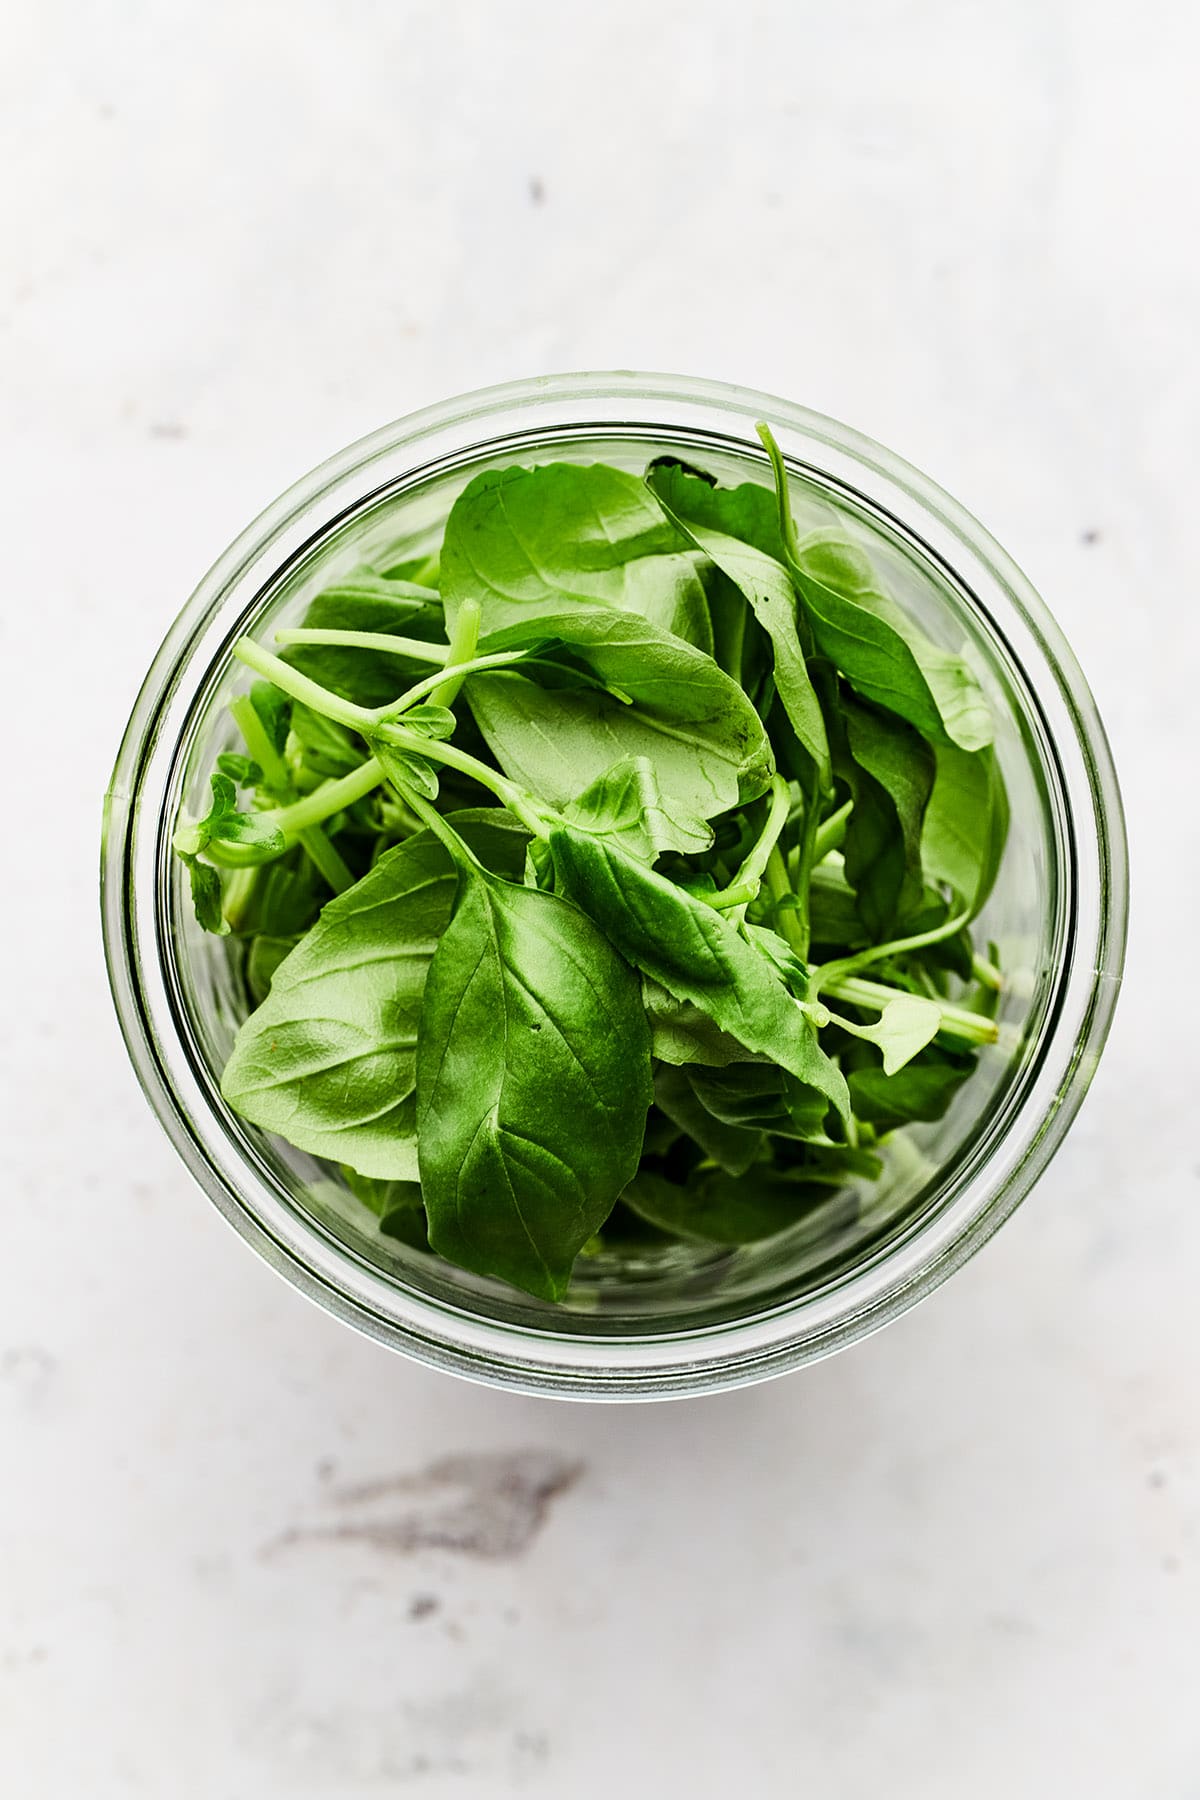 A glass jar filled with fresh basil leaves.